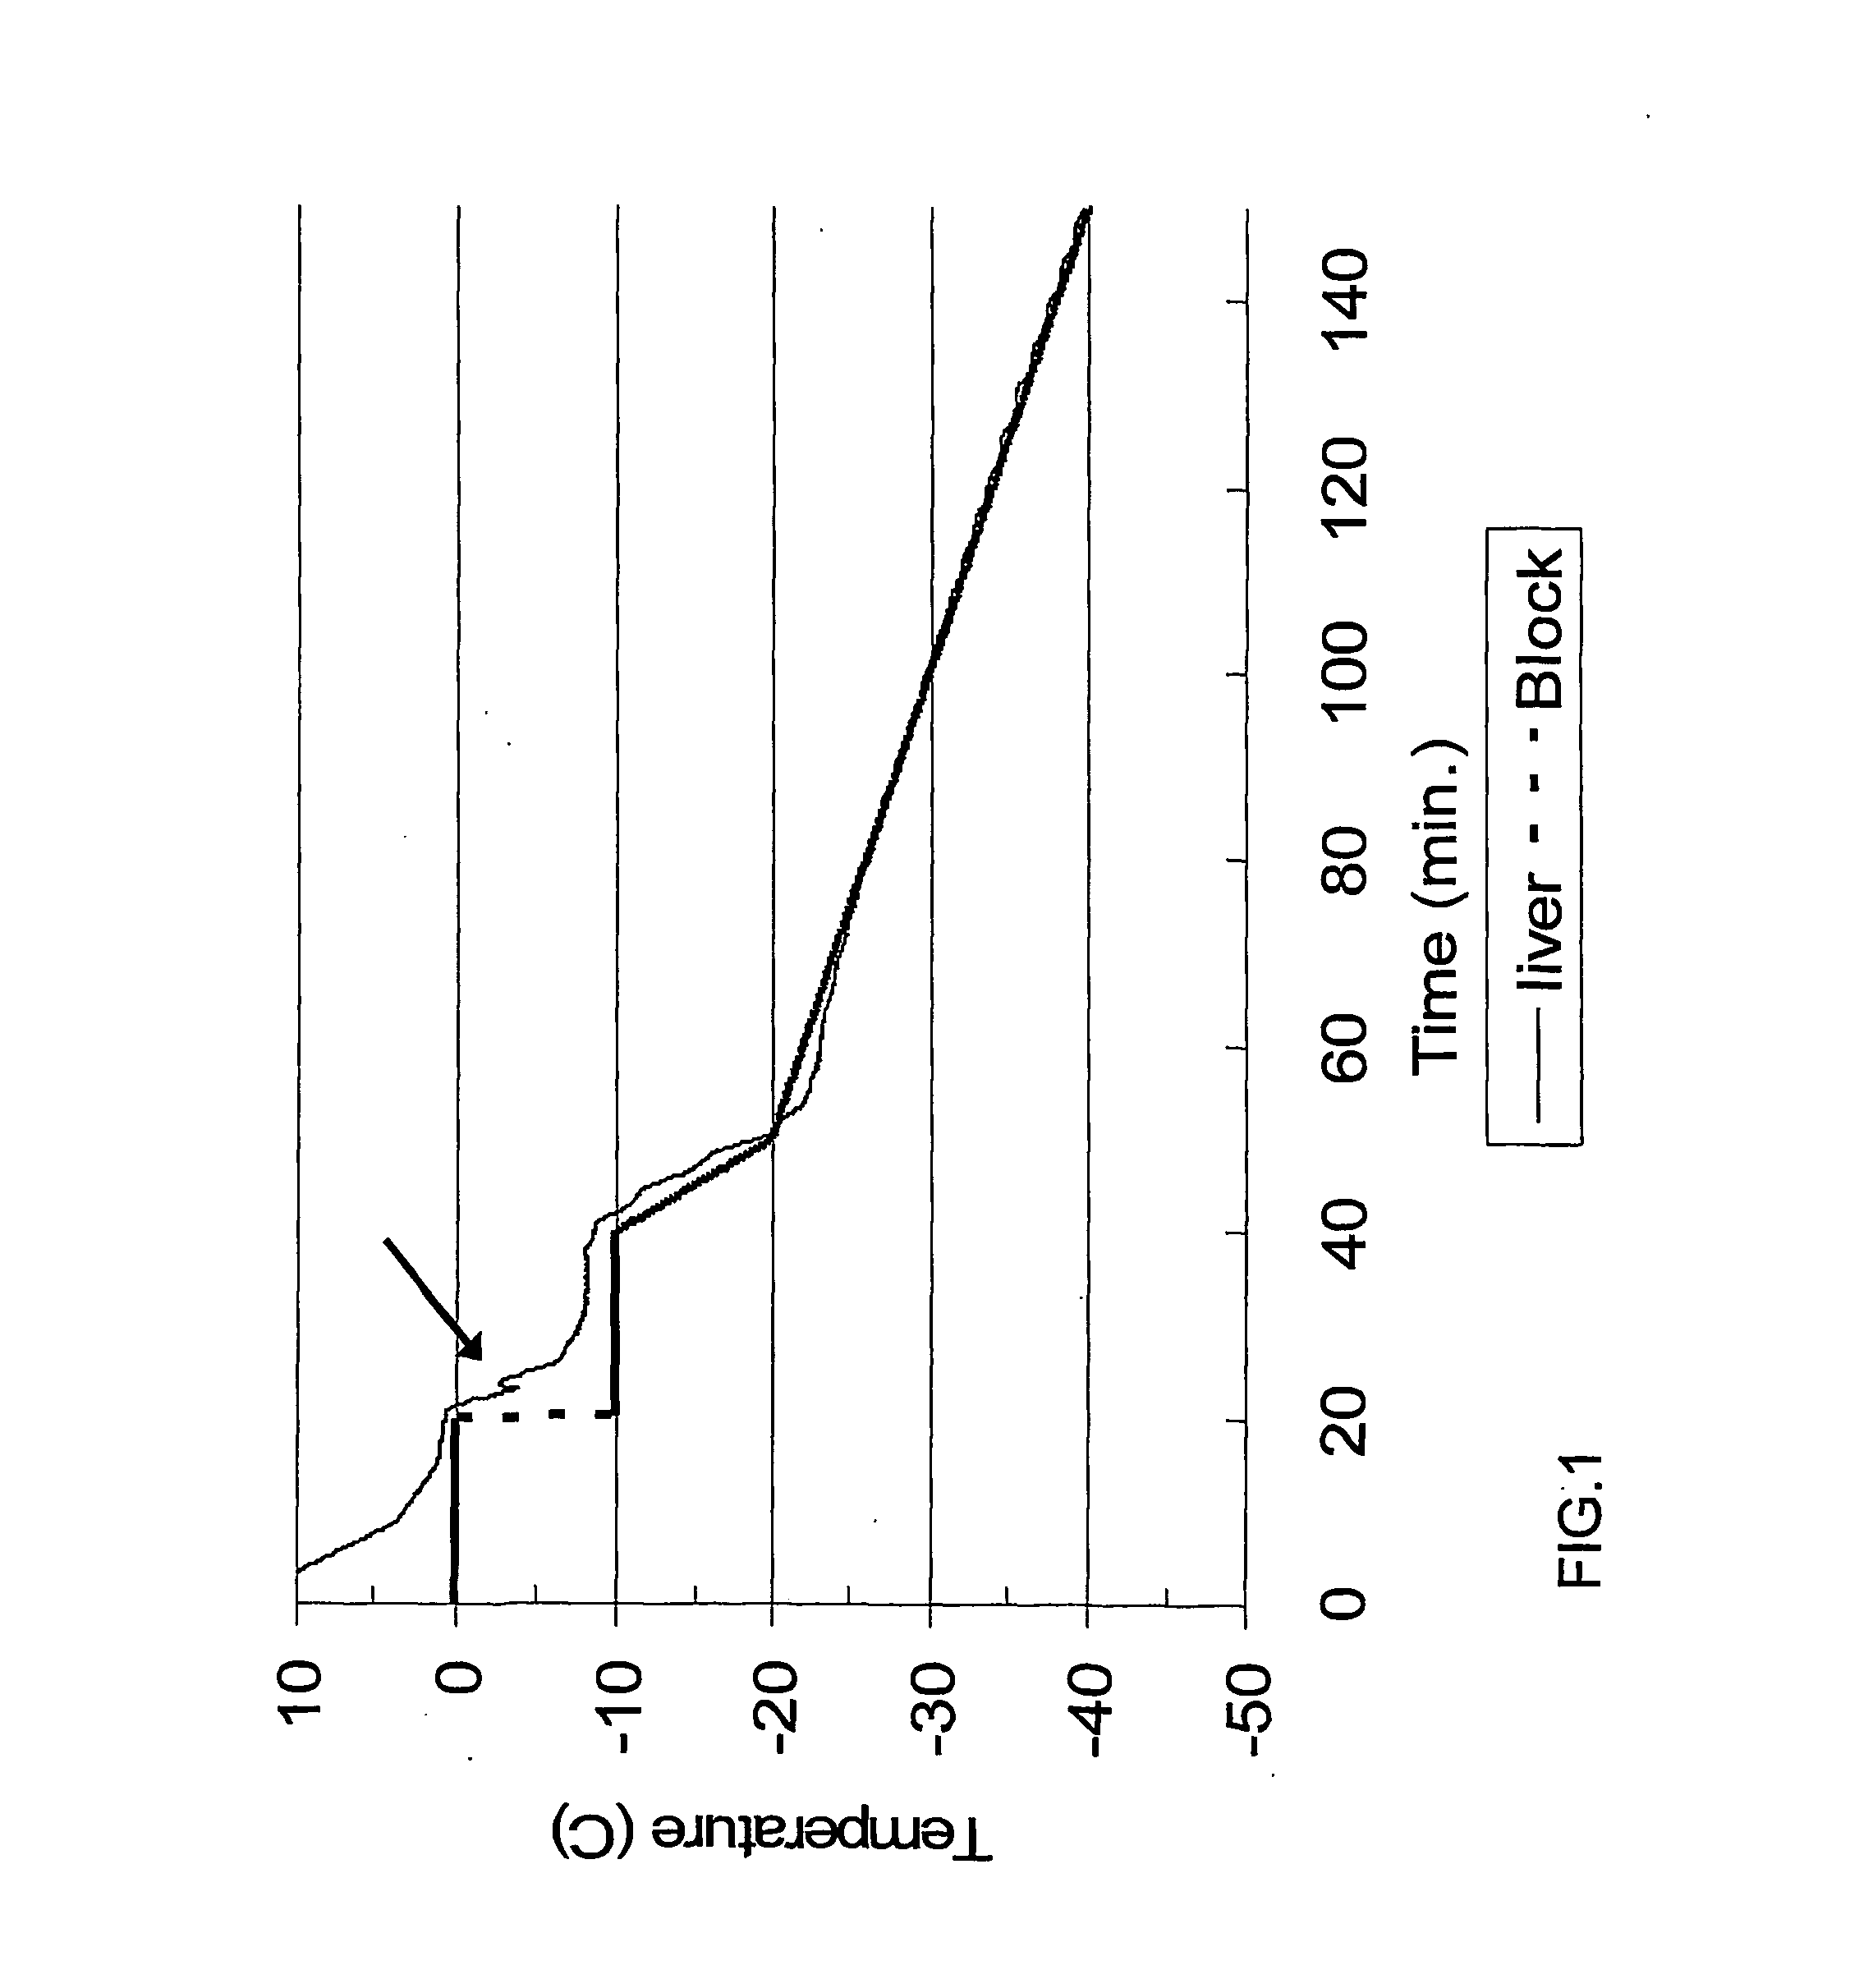 Frozen Viable Solid Organs and Method for Freezing Same